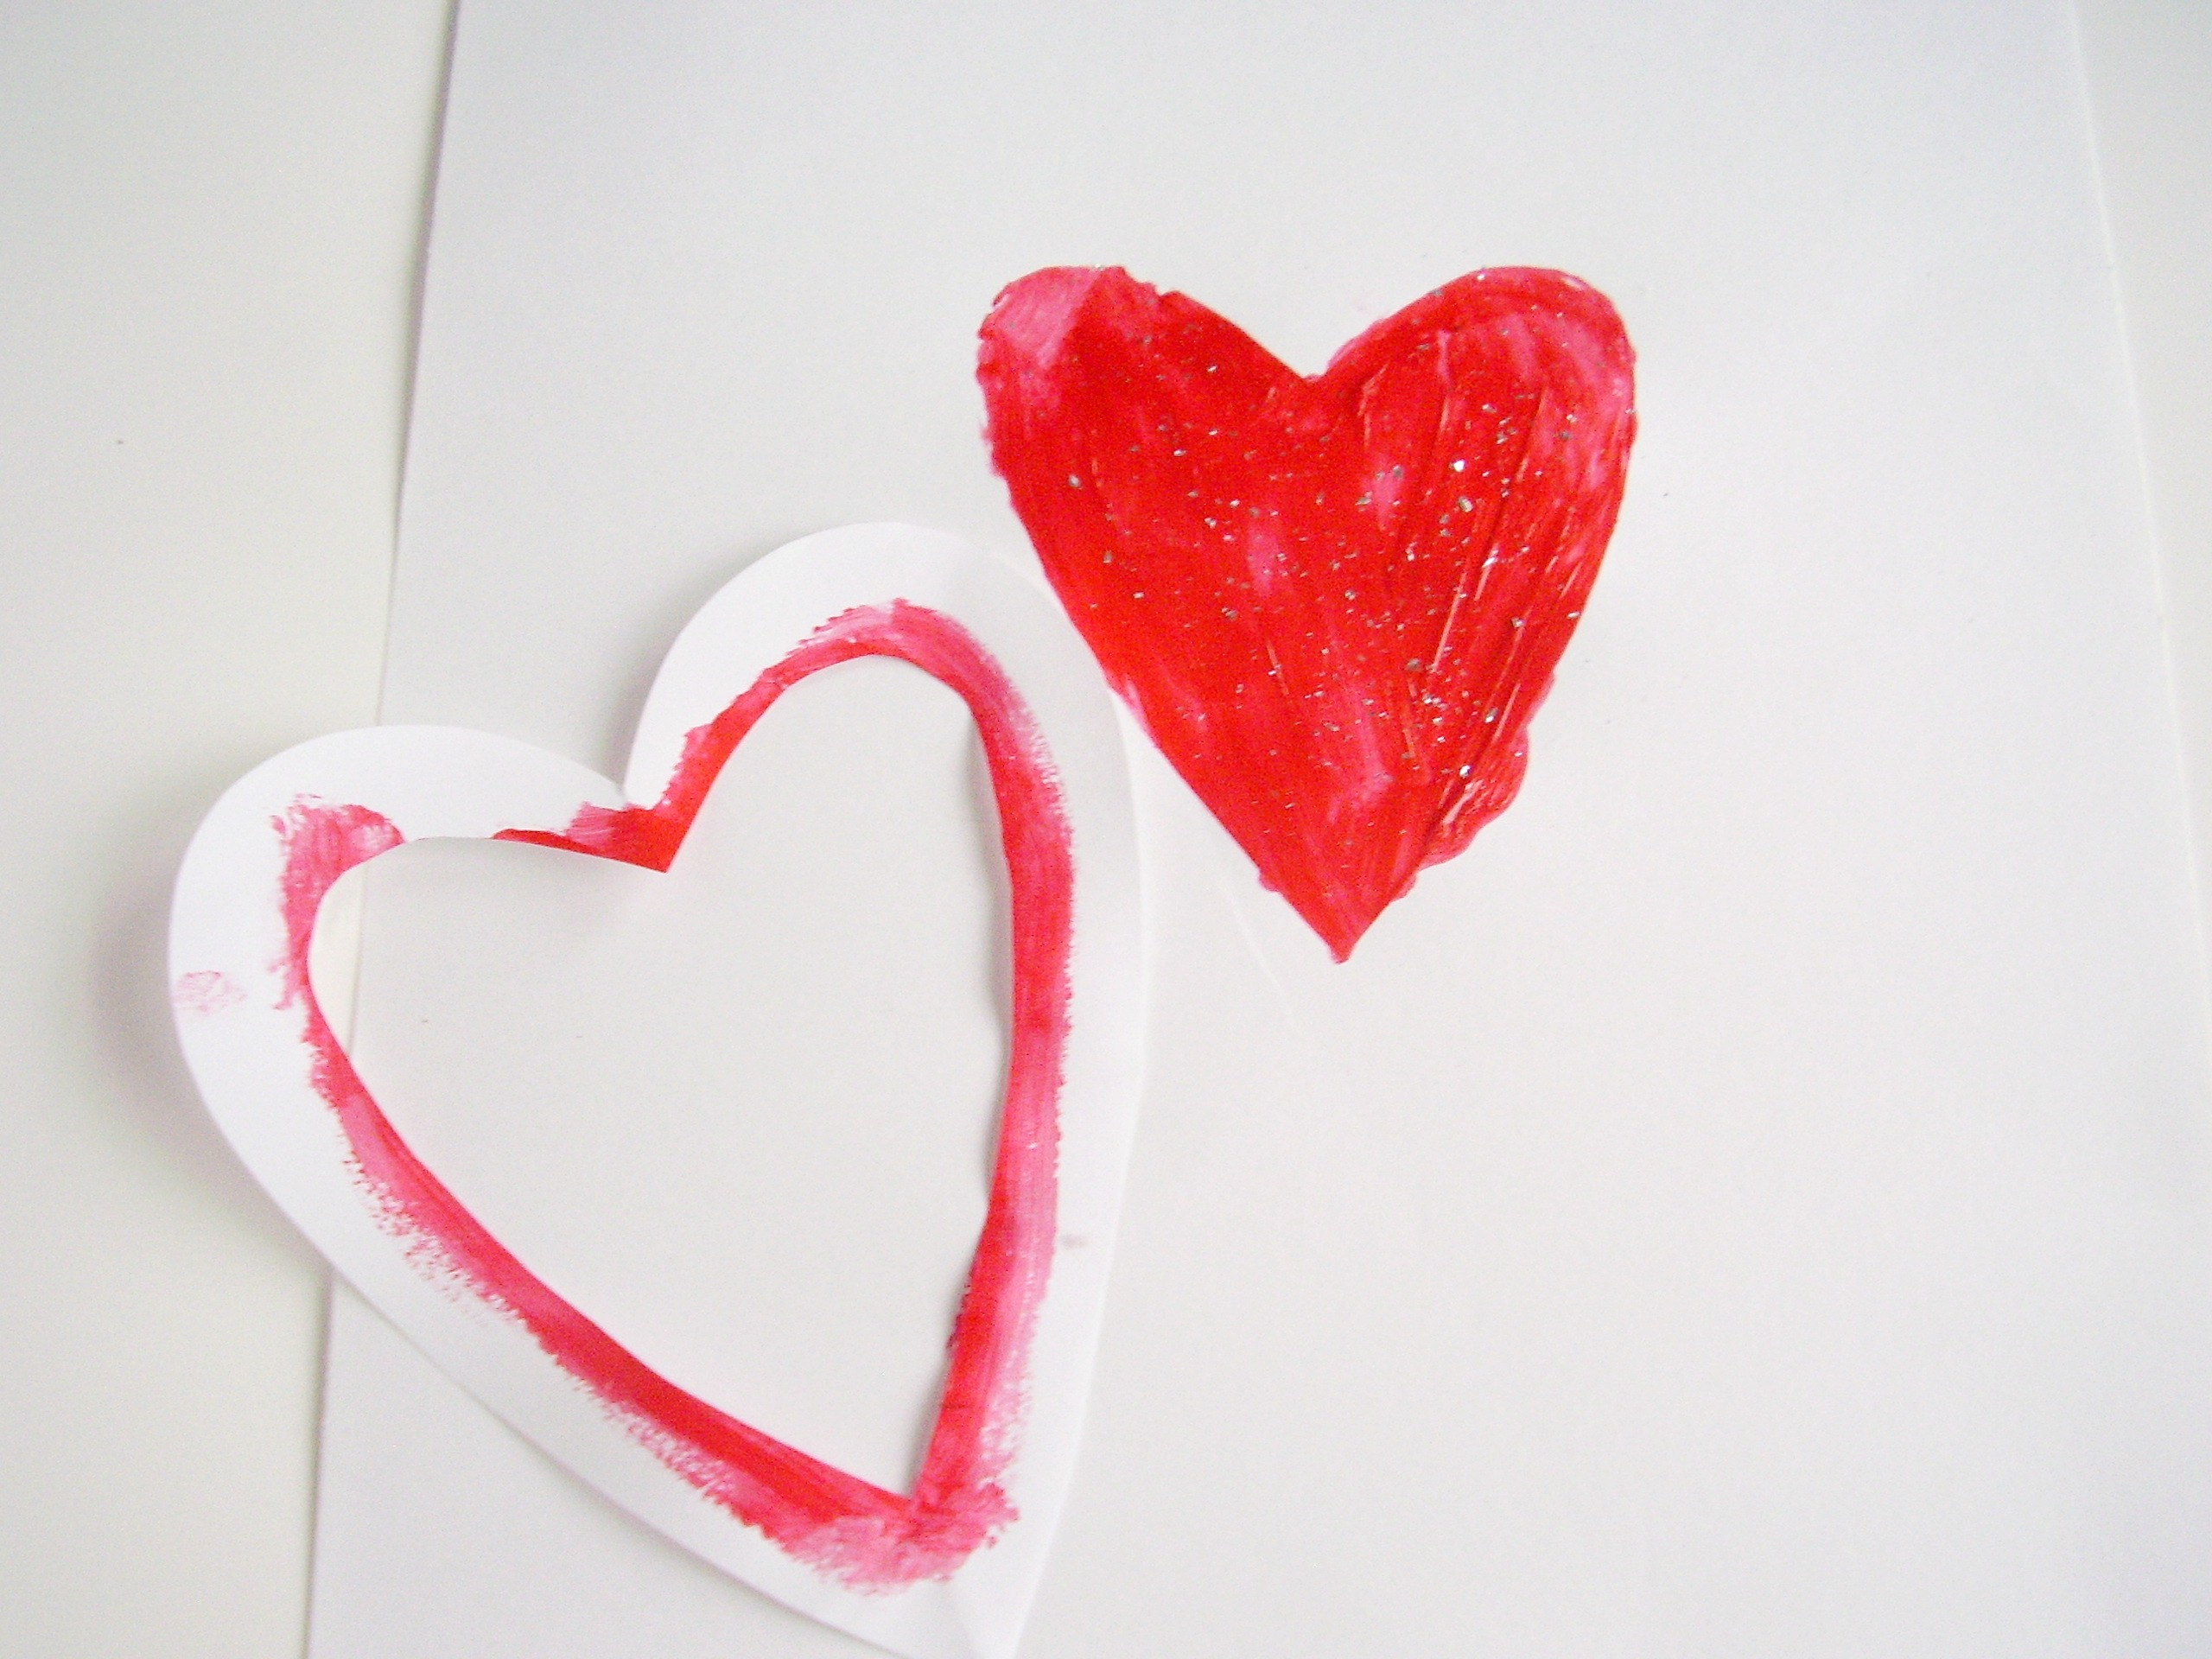 Easy Stencils Kids Can Make For Painting Valentines 